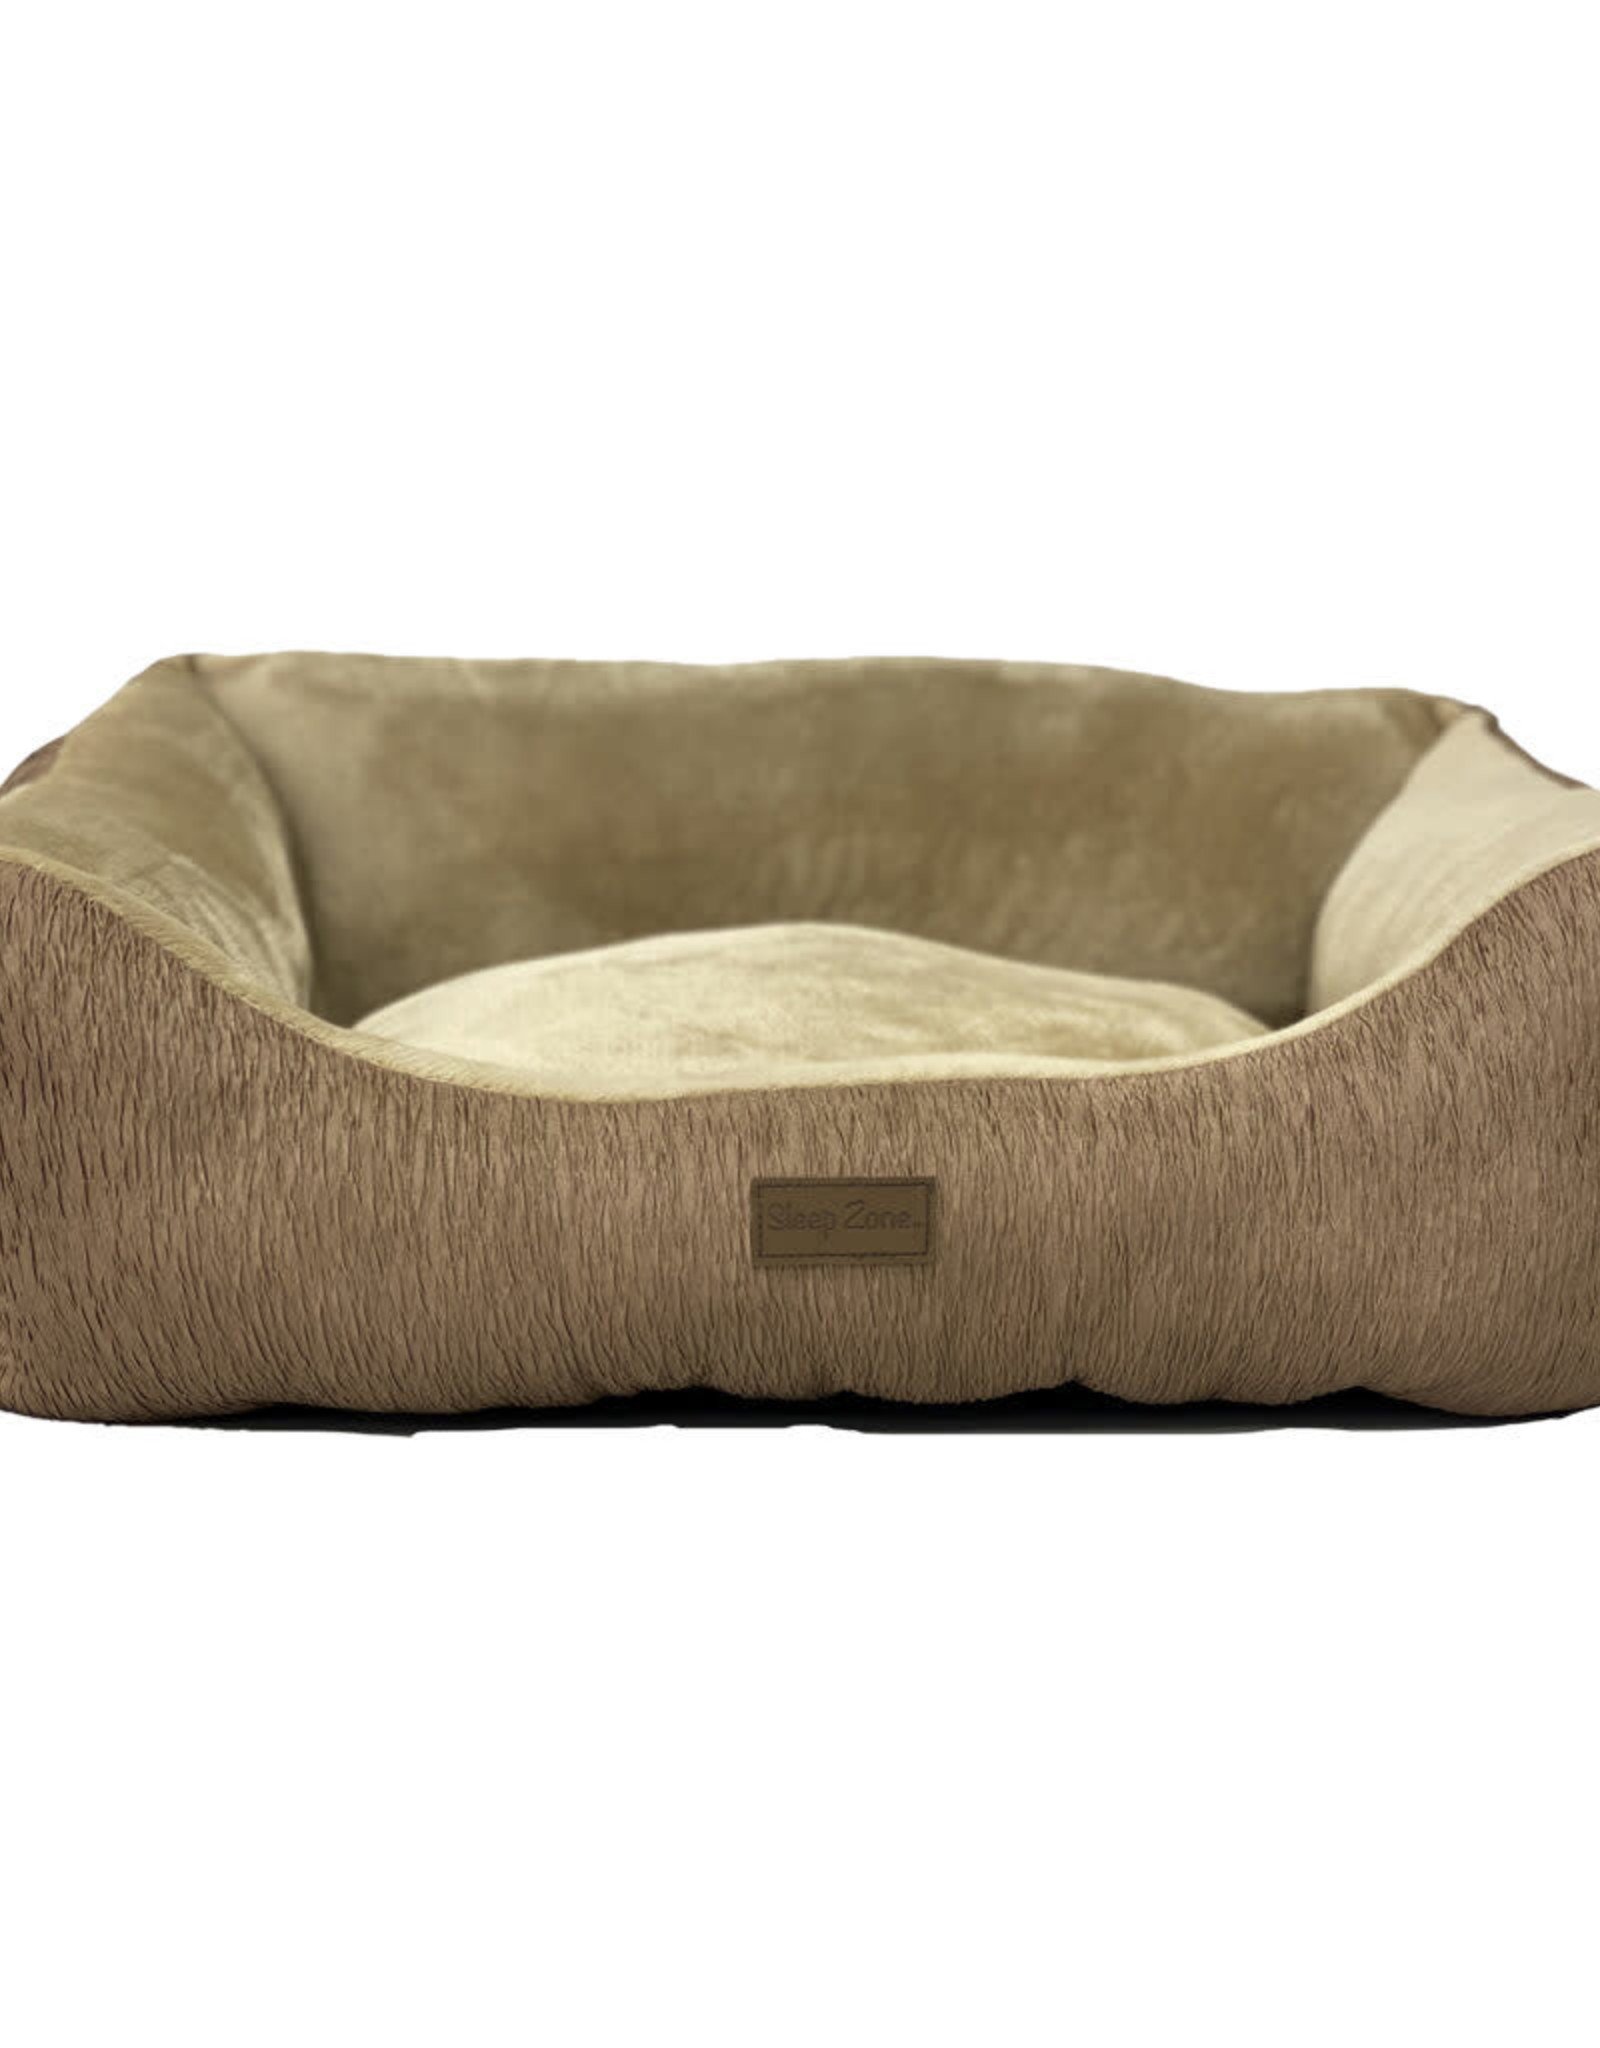 Ethical Ethical Sleep Zone Woodgrain Step In 20" Taupe